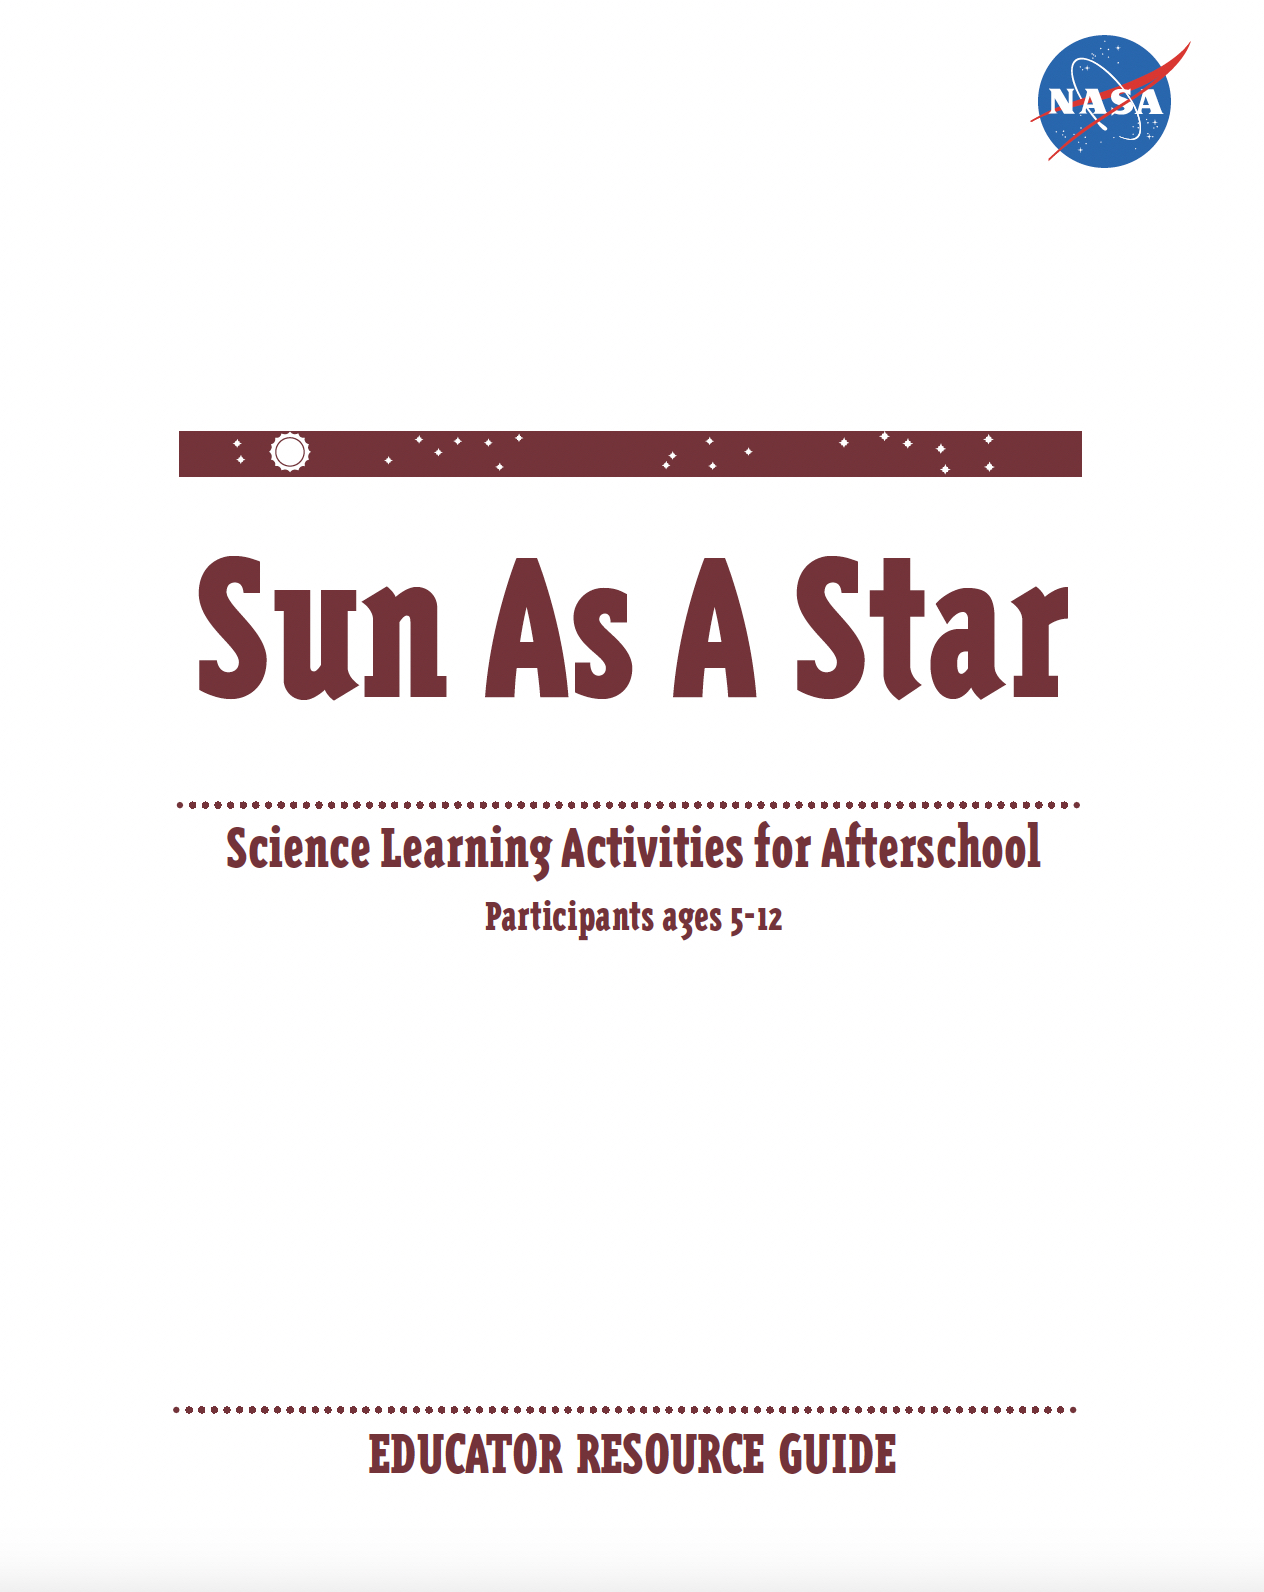 Cover of the educator guide has a white background with the title in maroon text, “Sun as a Star: Science Learning Activities for Afterschool, Participants ages 5-12, Educator Resource Guide.” The NASA logo is in the upper right hand corner of the cover page: a blue circle with “NASA” in bold, white text at the center of the circle, with red and white accents to the logo, including white stars in the background.